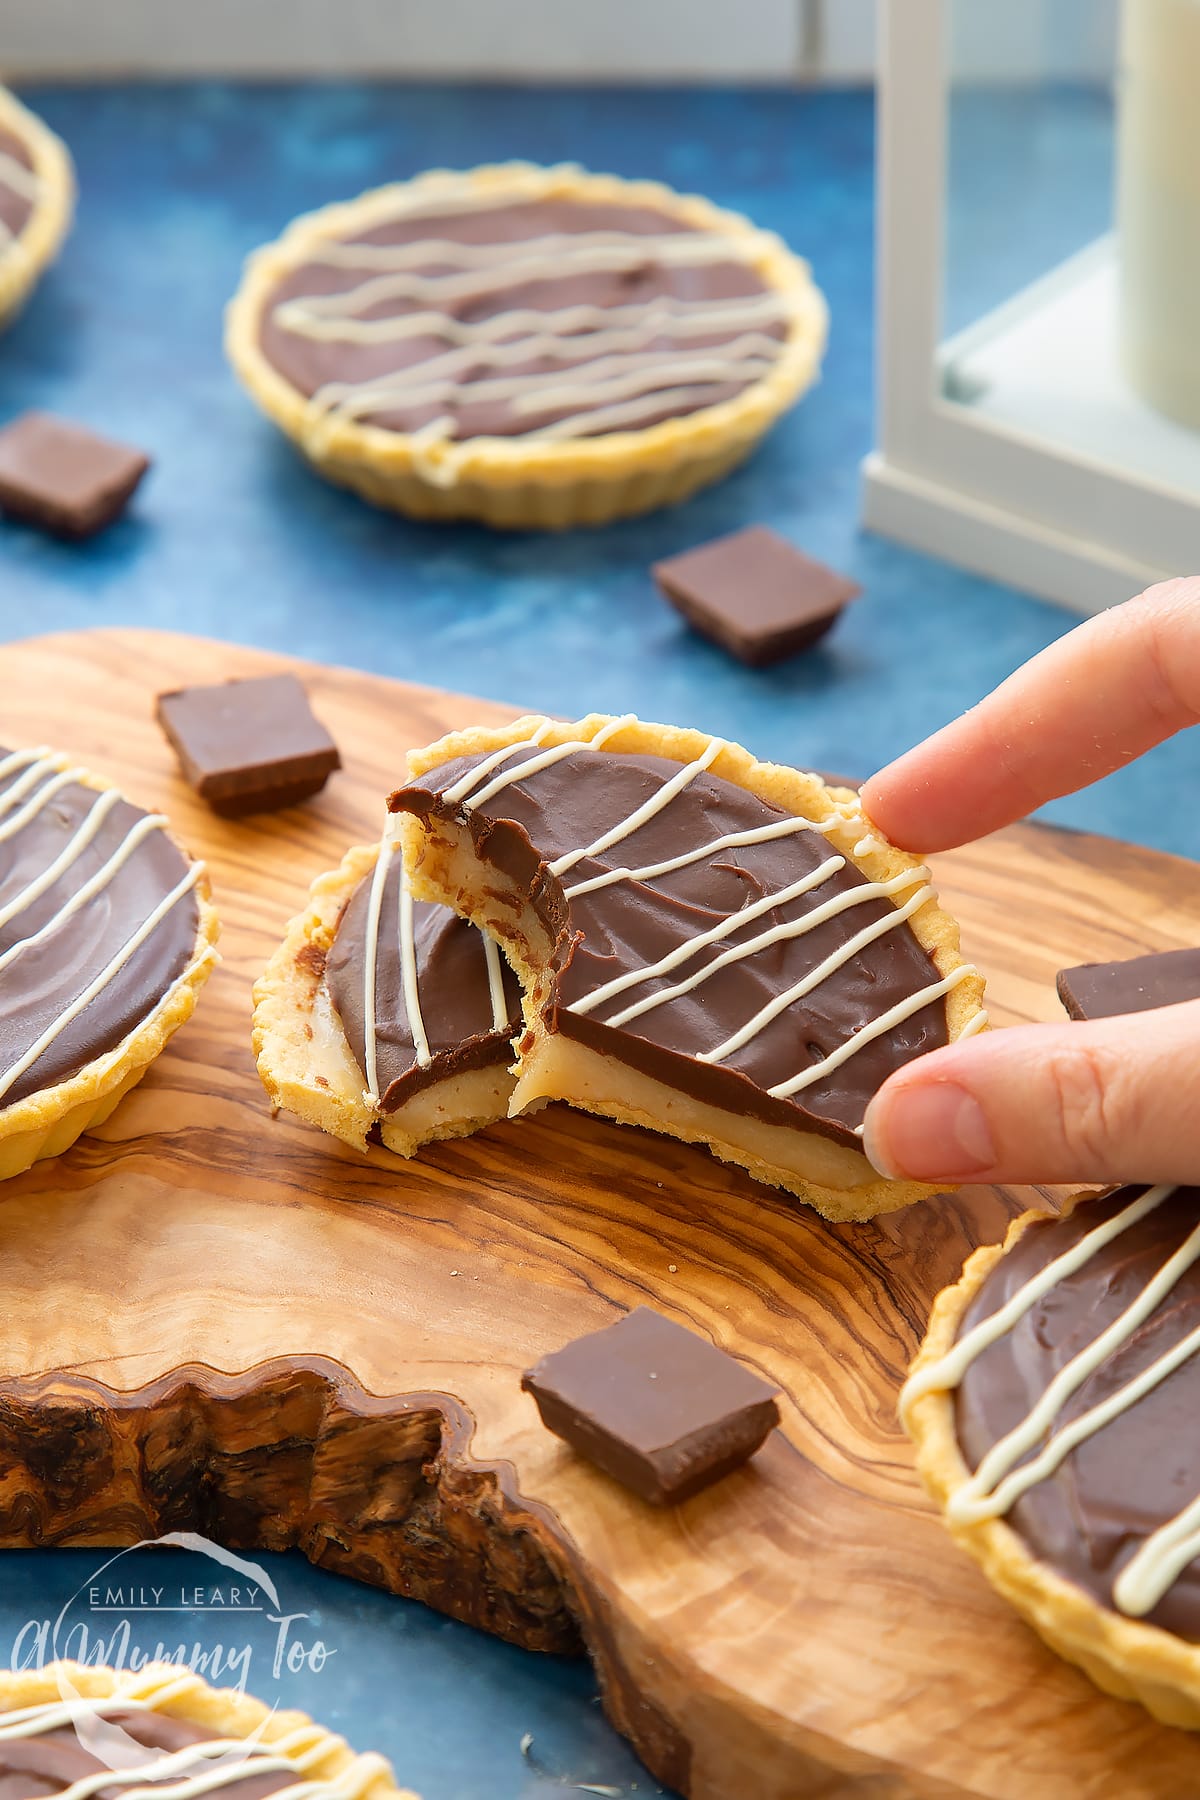 Mini chocolate tarts on a wooden board. One tart has been cut in half. A hand holds a half, which has a bite out of it.